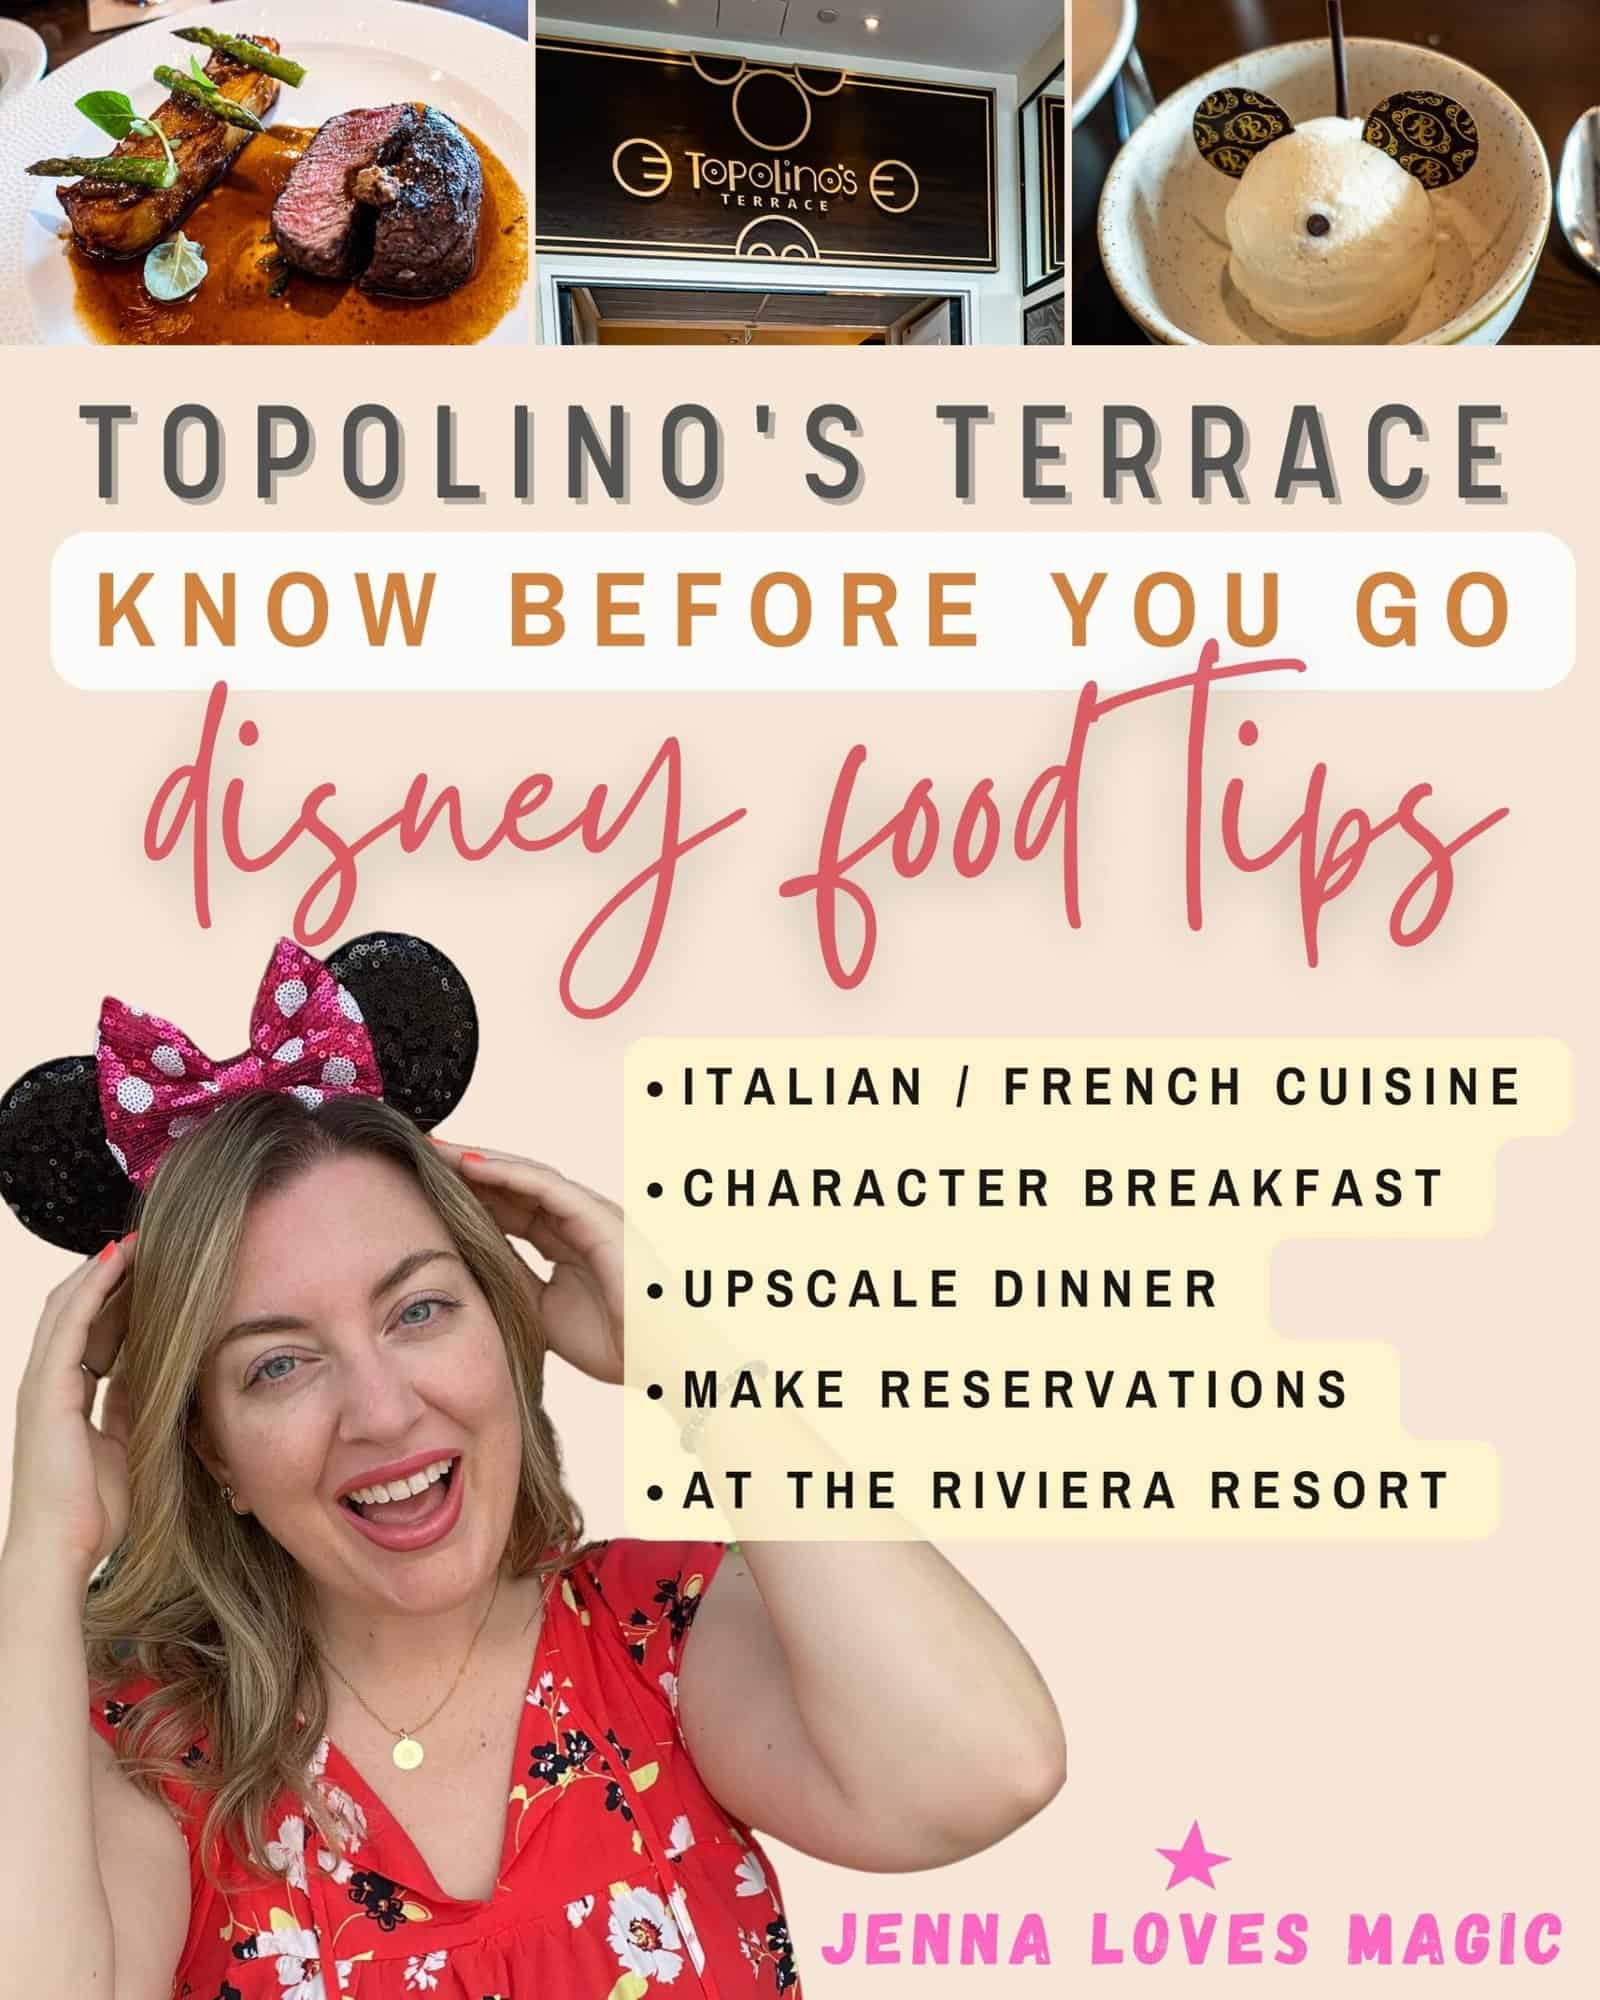 Topolinos Terrace Disney Dining Tips with photos caption and logo from 